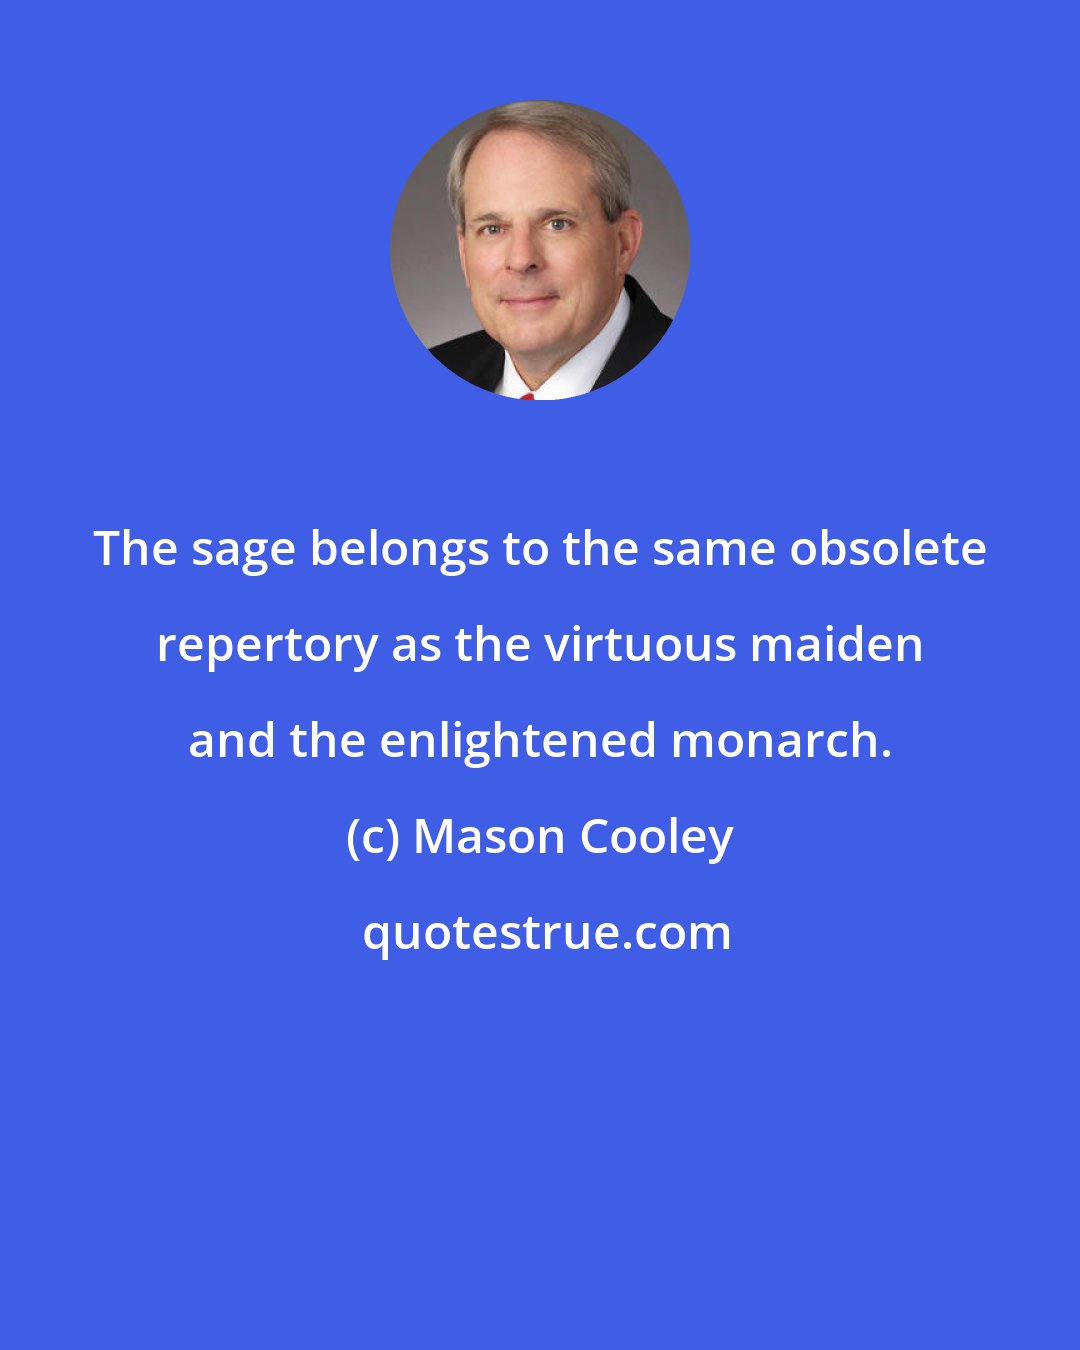 Mason Cooley: The sage belongs to the same obsolete repertory as the virtuous maiden and the enlightened monarch.